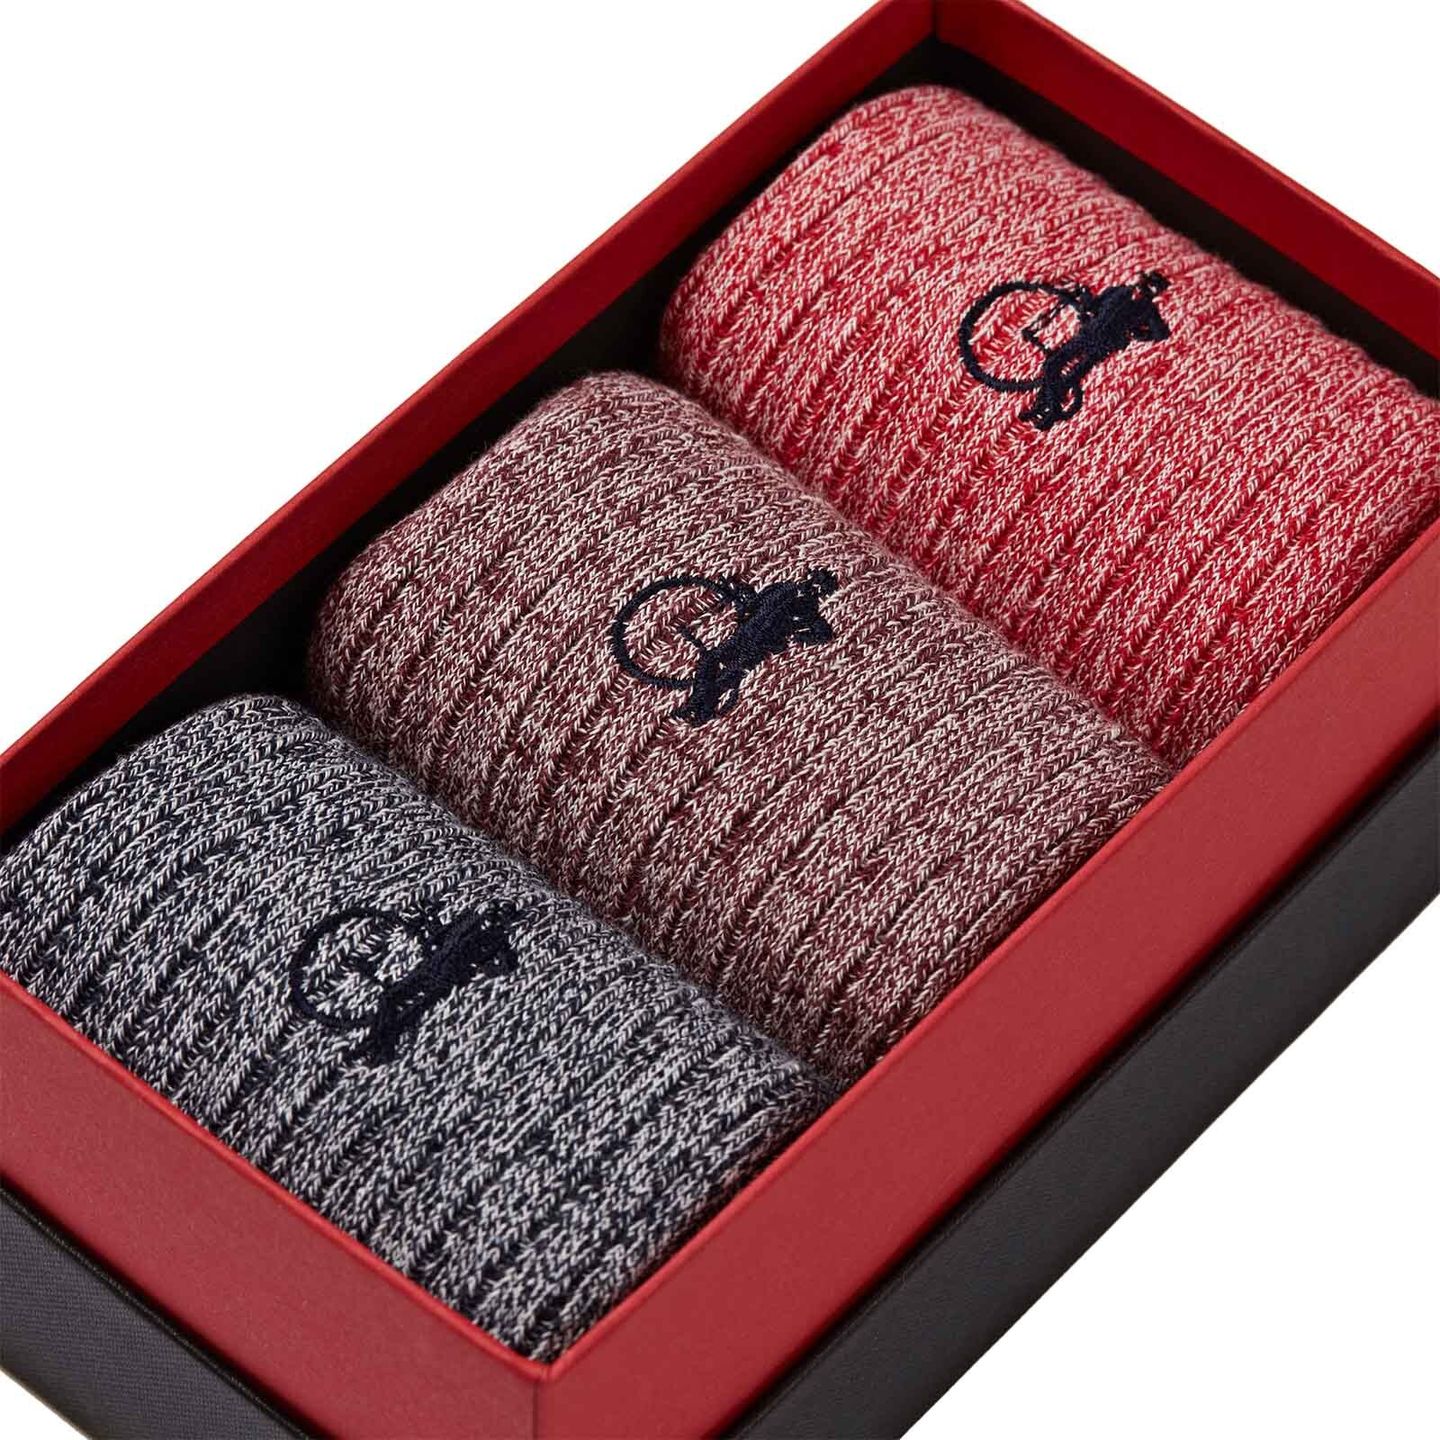 3 pair of marl casual boot socks in a box